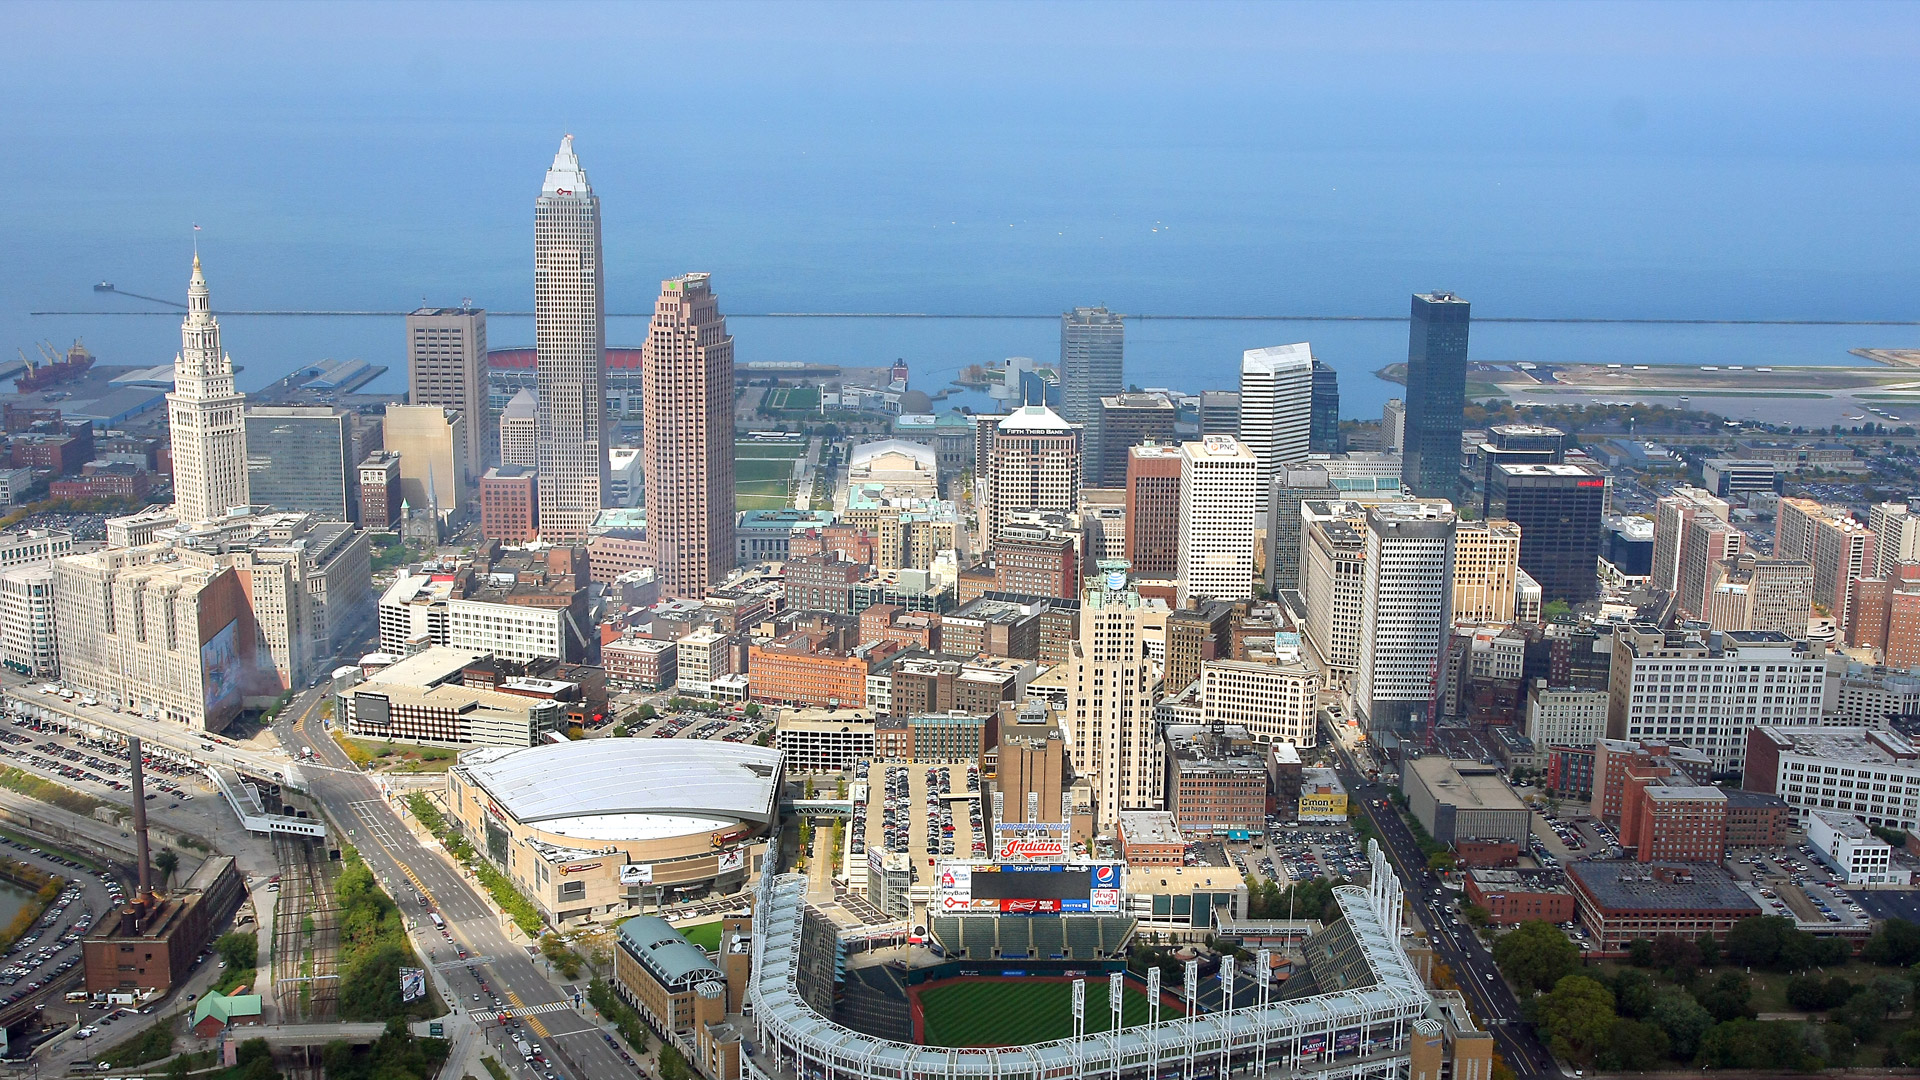 Ariel view of the city of Cleveland